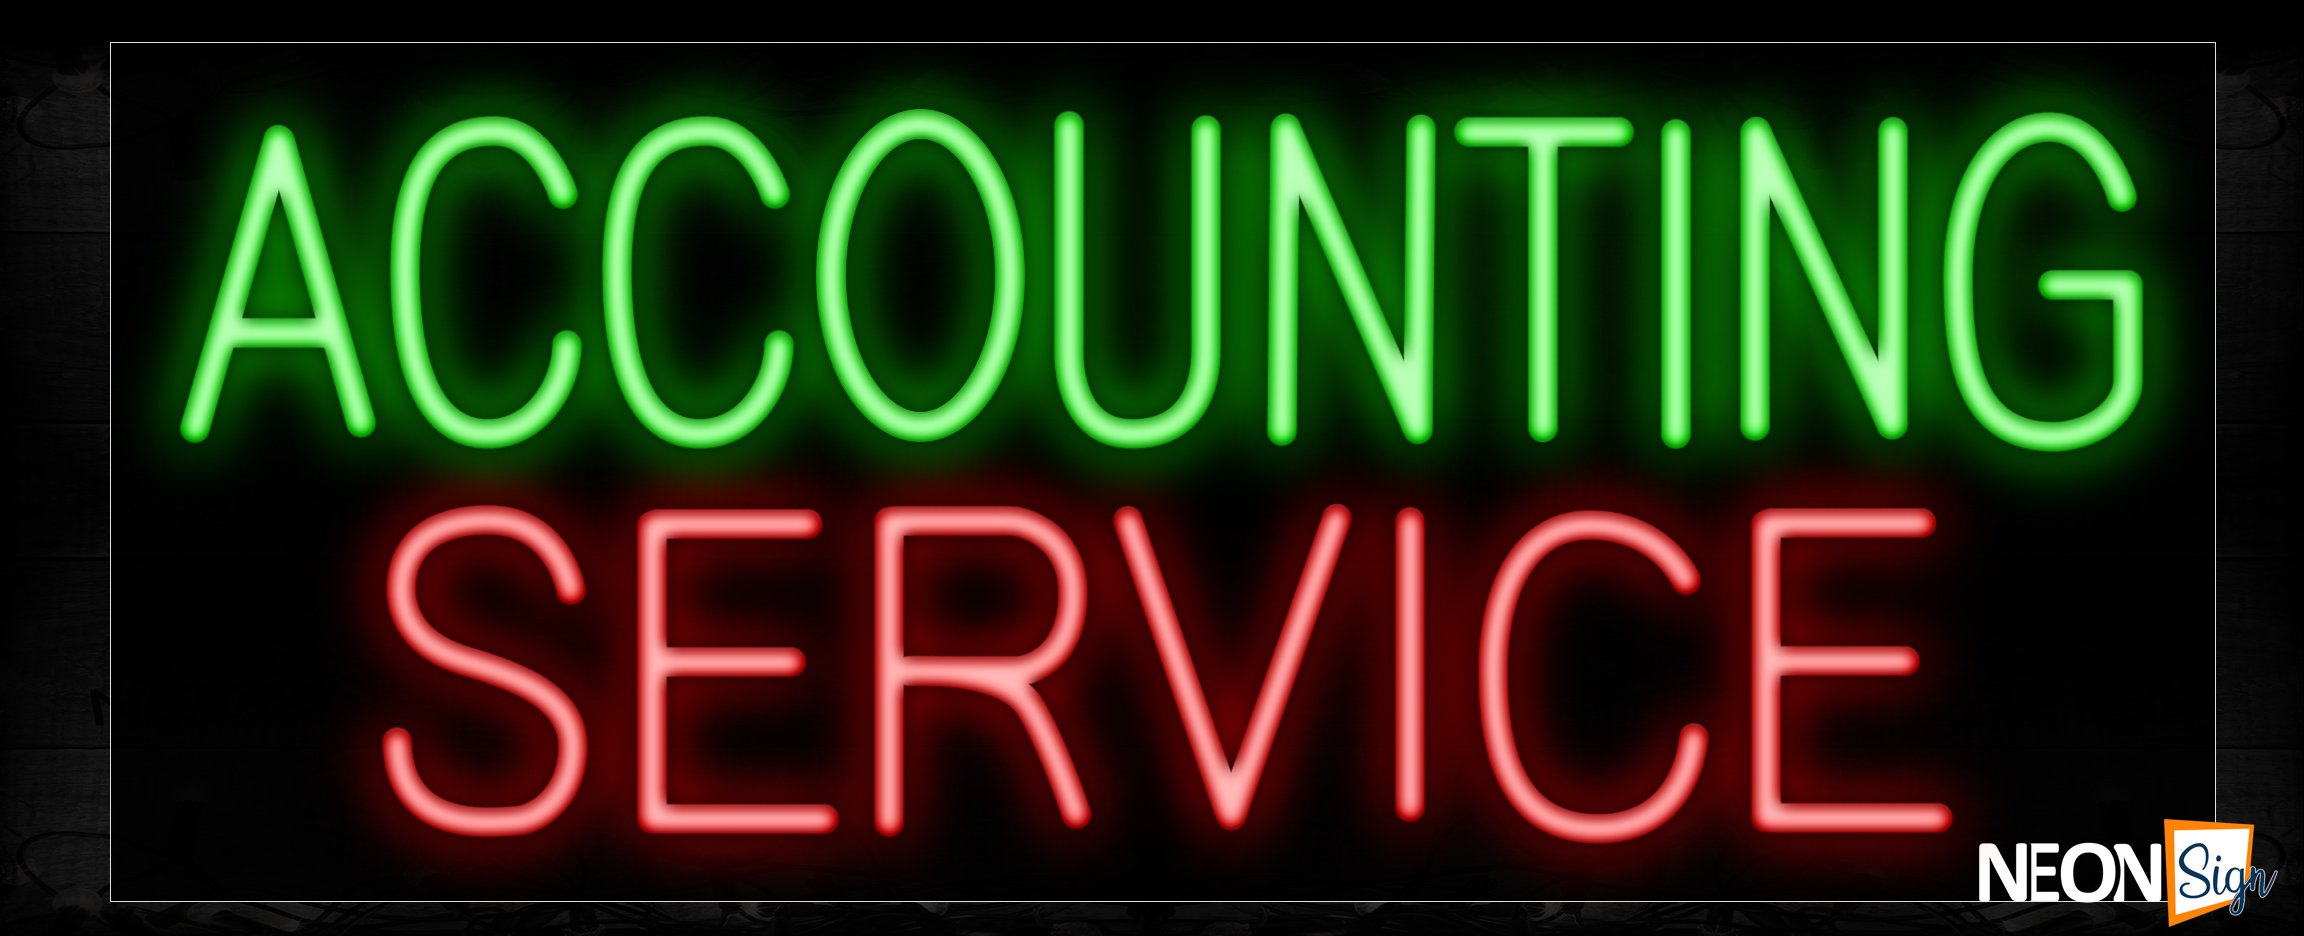 Image of 11345 Accounting Service Neon Sign_13x32 Black Backing